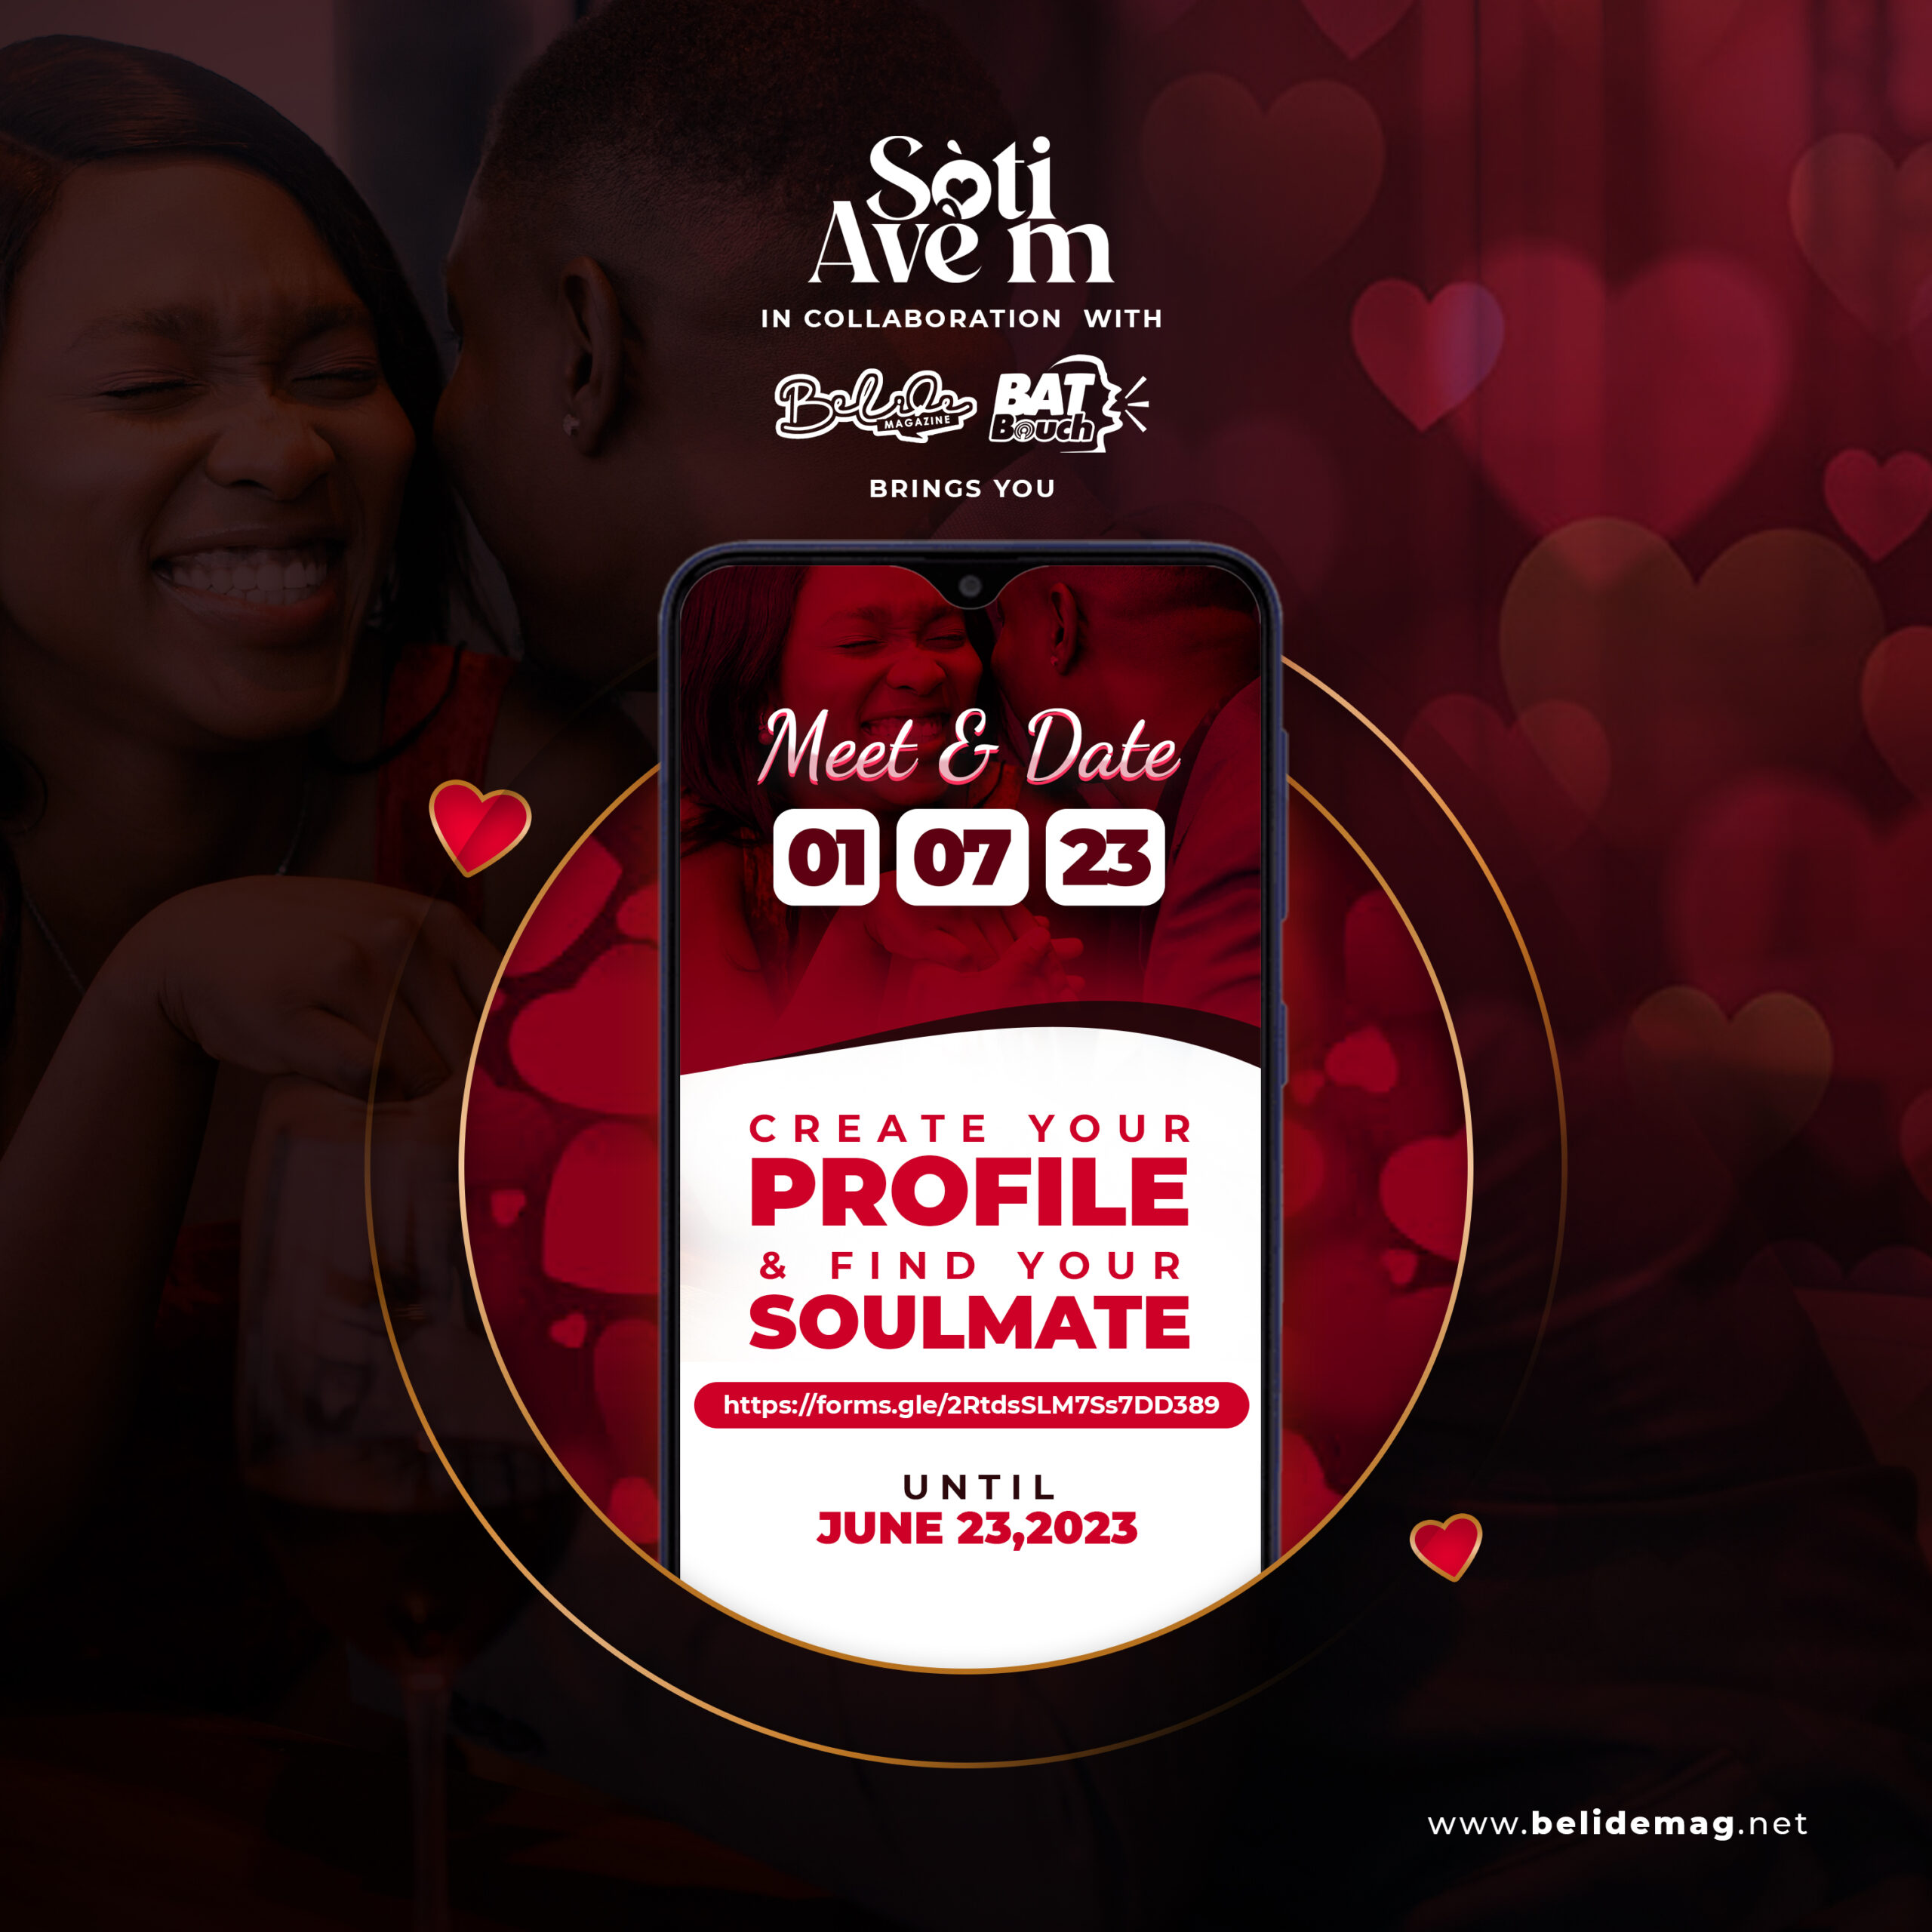 Create your profile for the Meet & Date